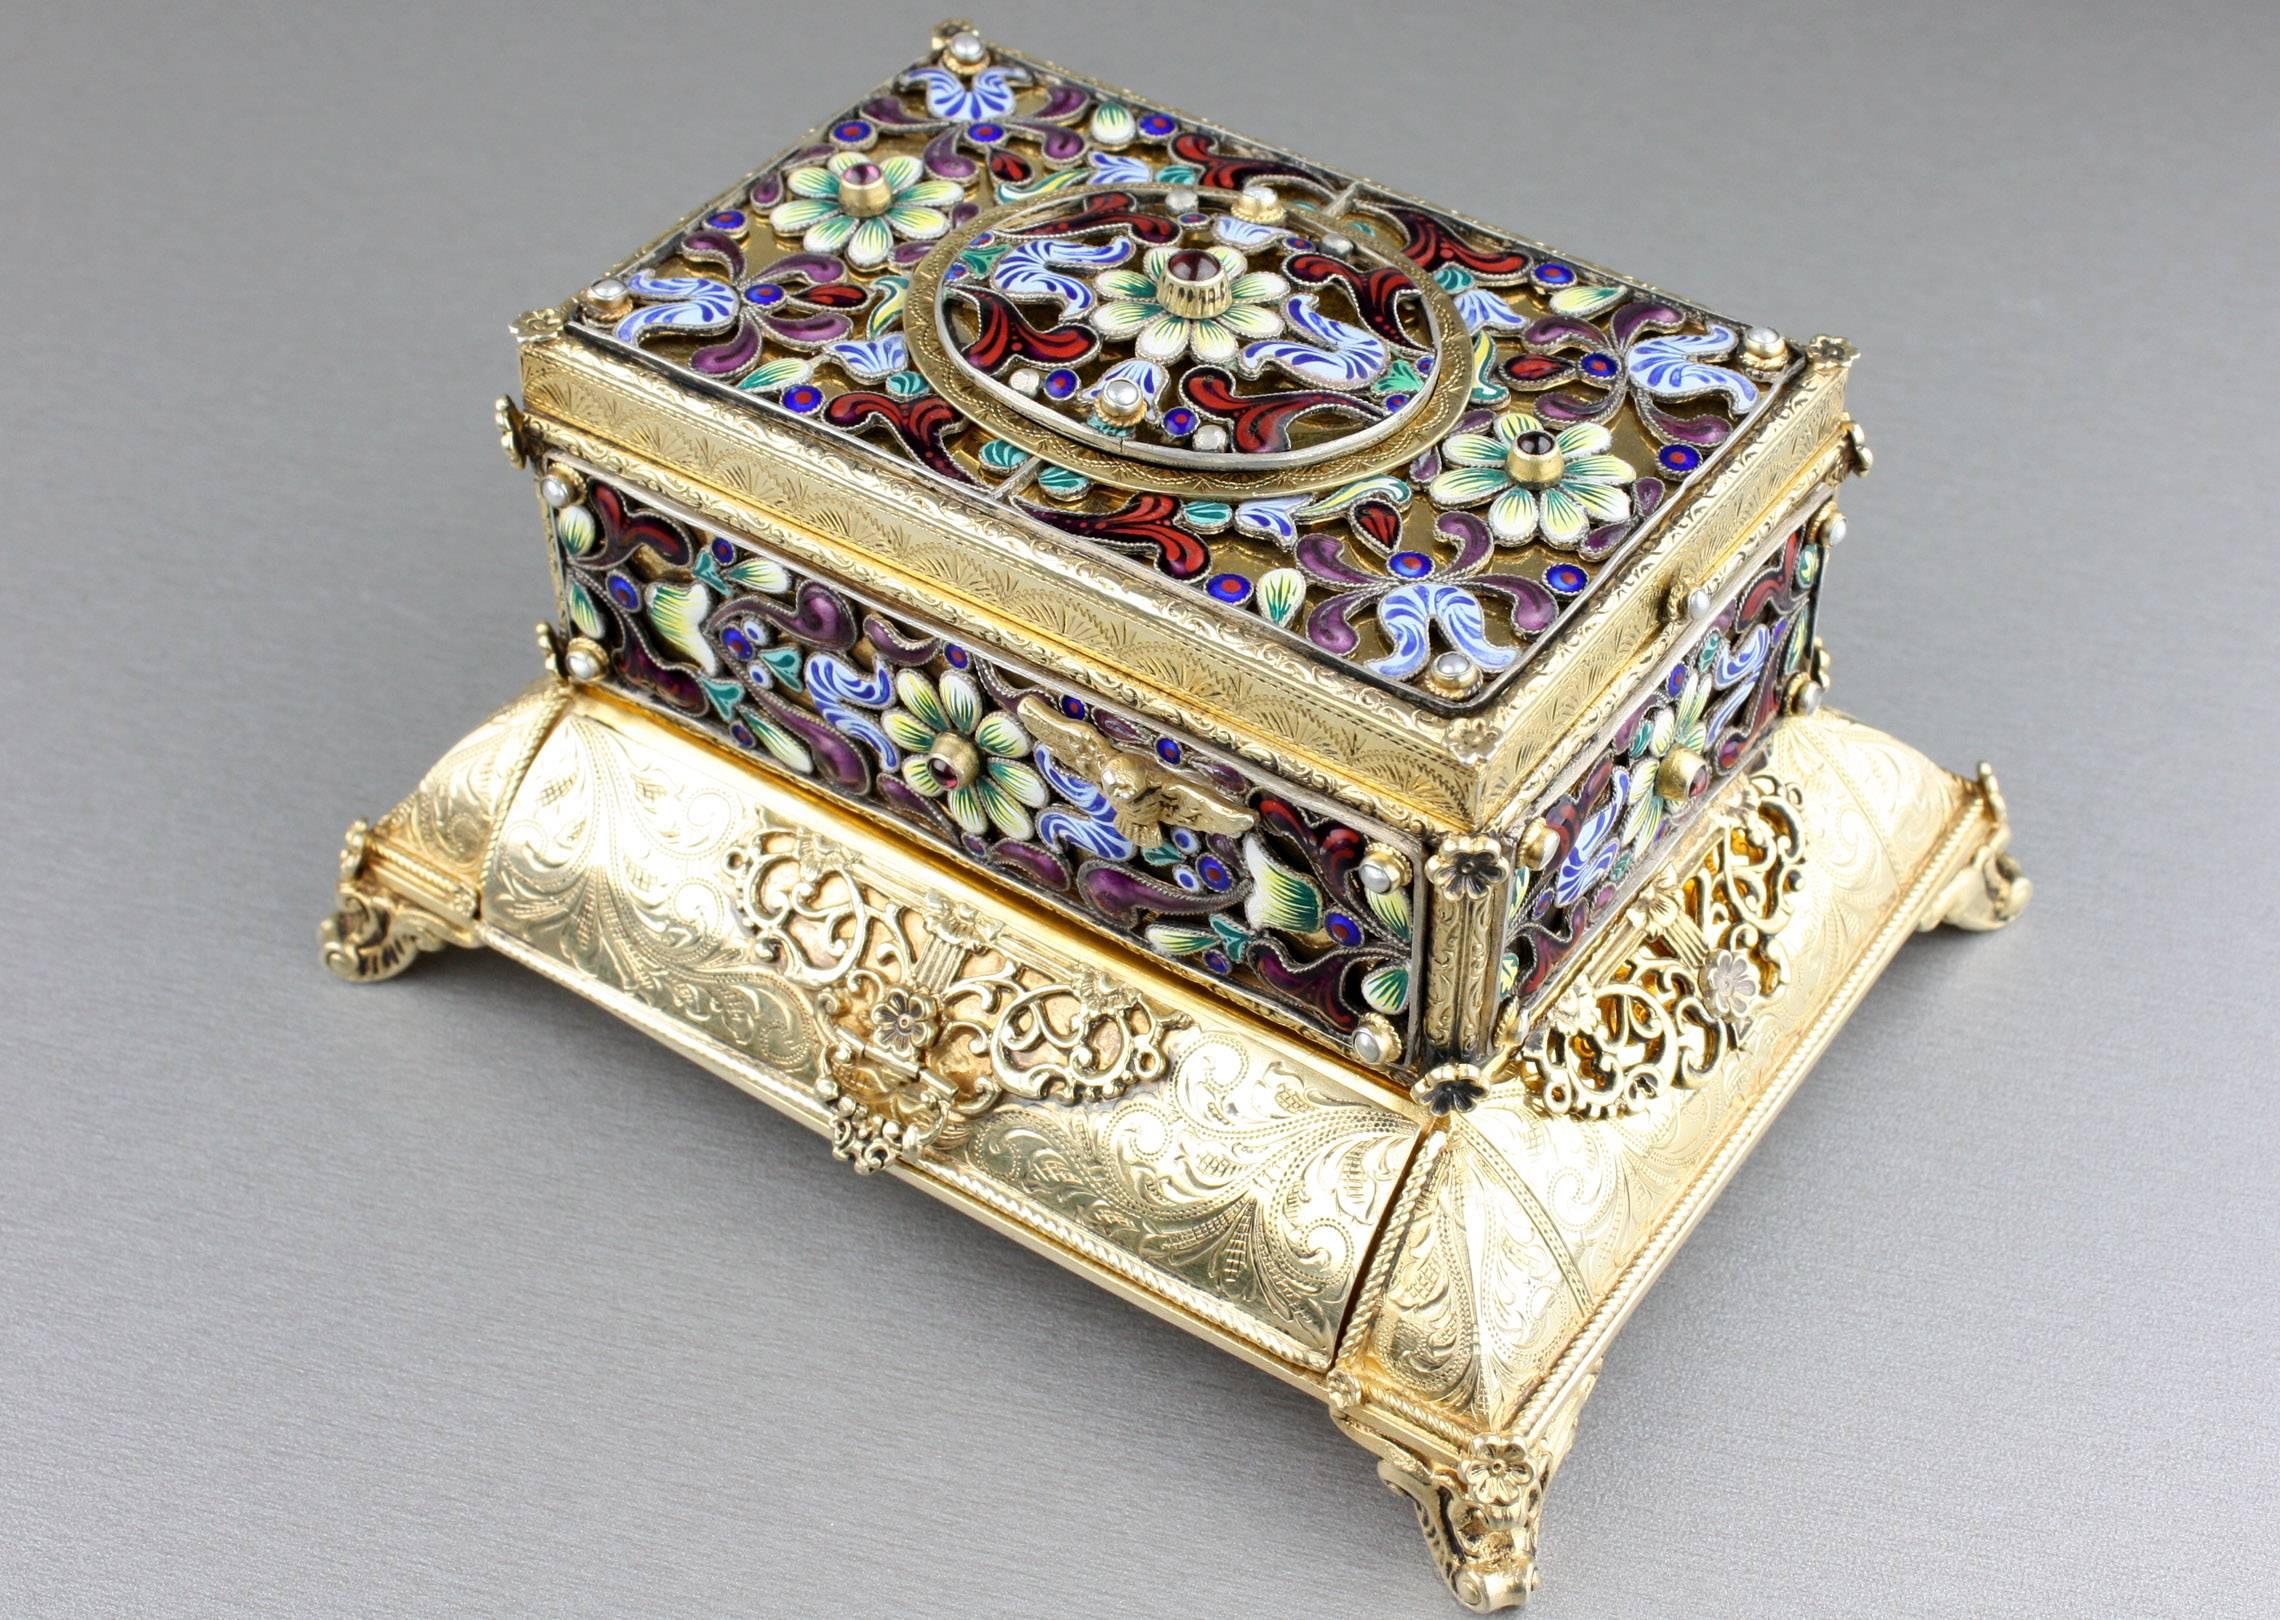 A highly attractive vintage silver-gilt and pastel filigree enamel casket-form singing bird box by Karl Griesbaum,
 
German,
 
Mid-20th century.
 
Model 11.

Video available on request

Golden wonder.
 
When wound and the bird-form